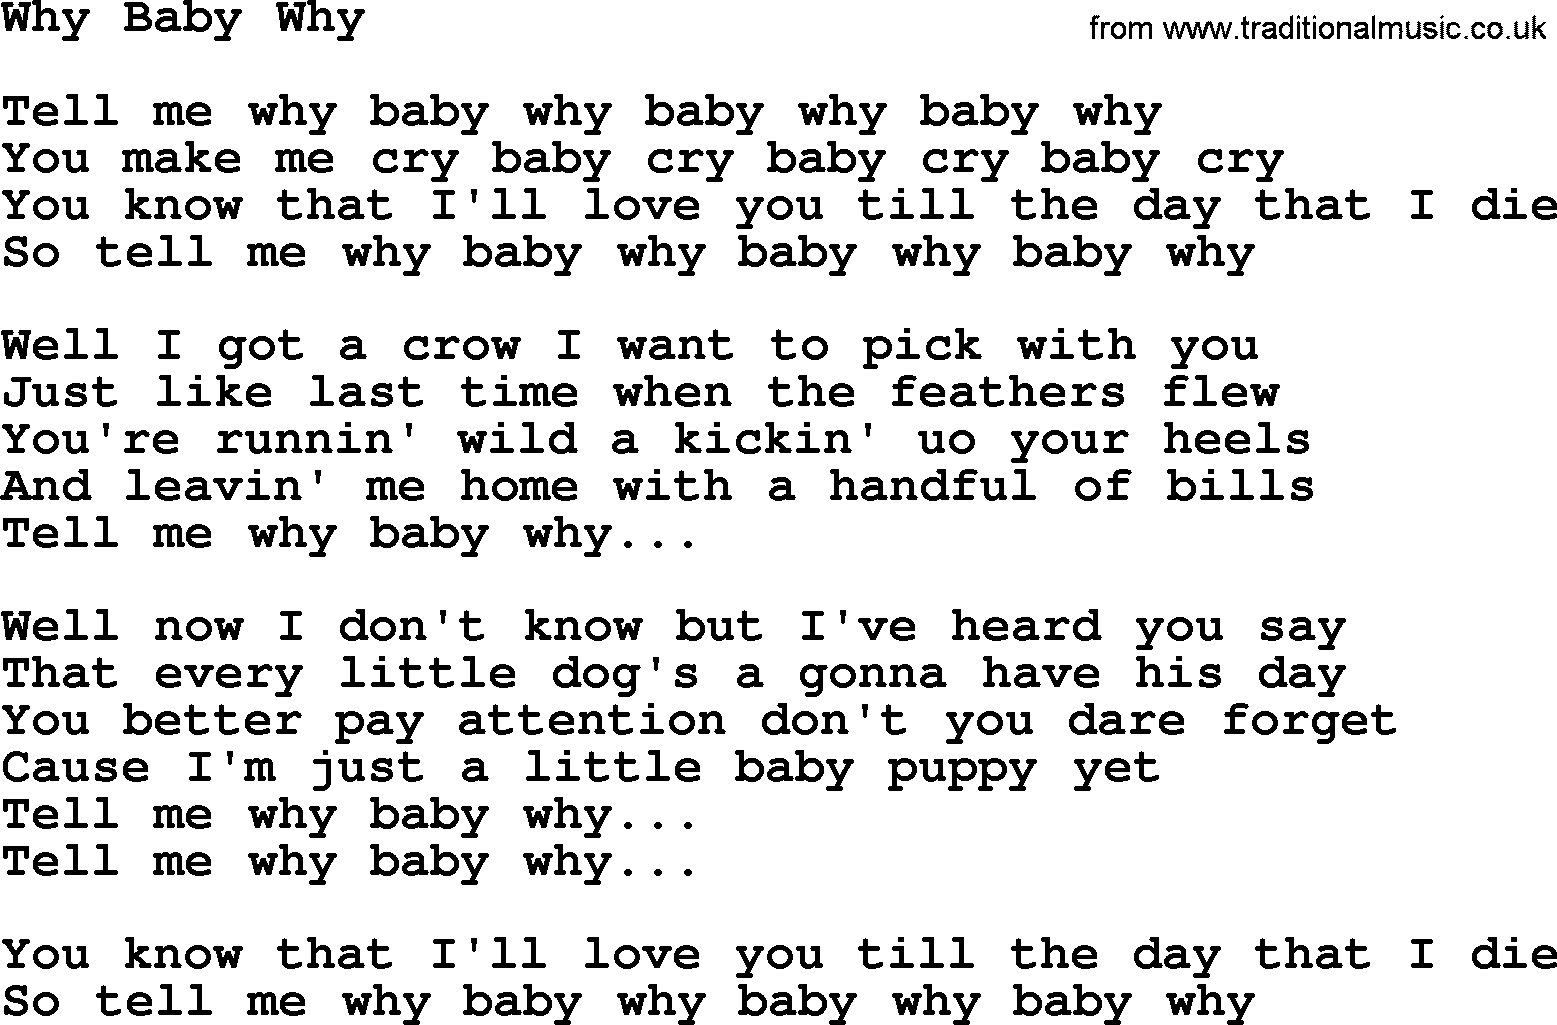 Willie Nelson song: Why Baby Why lyrics